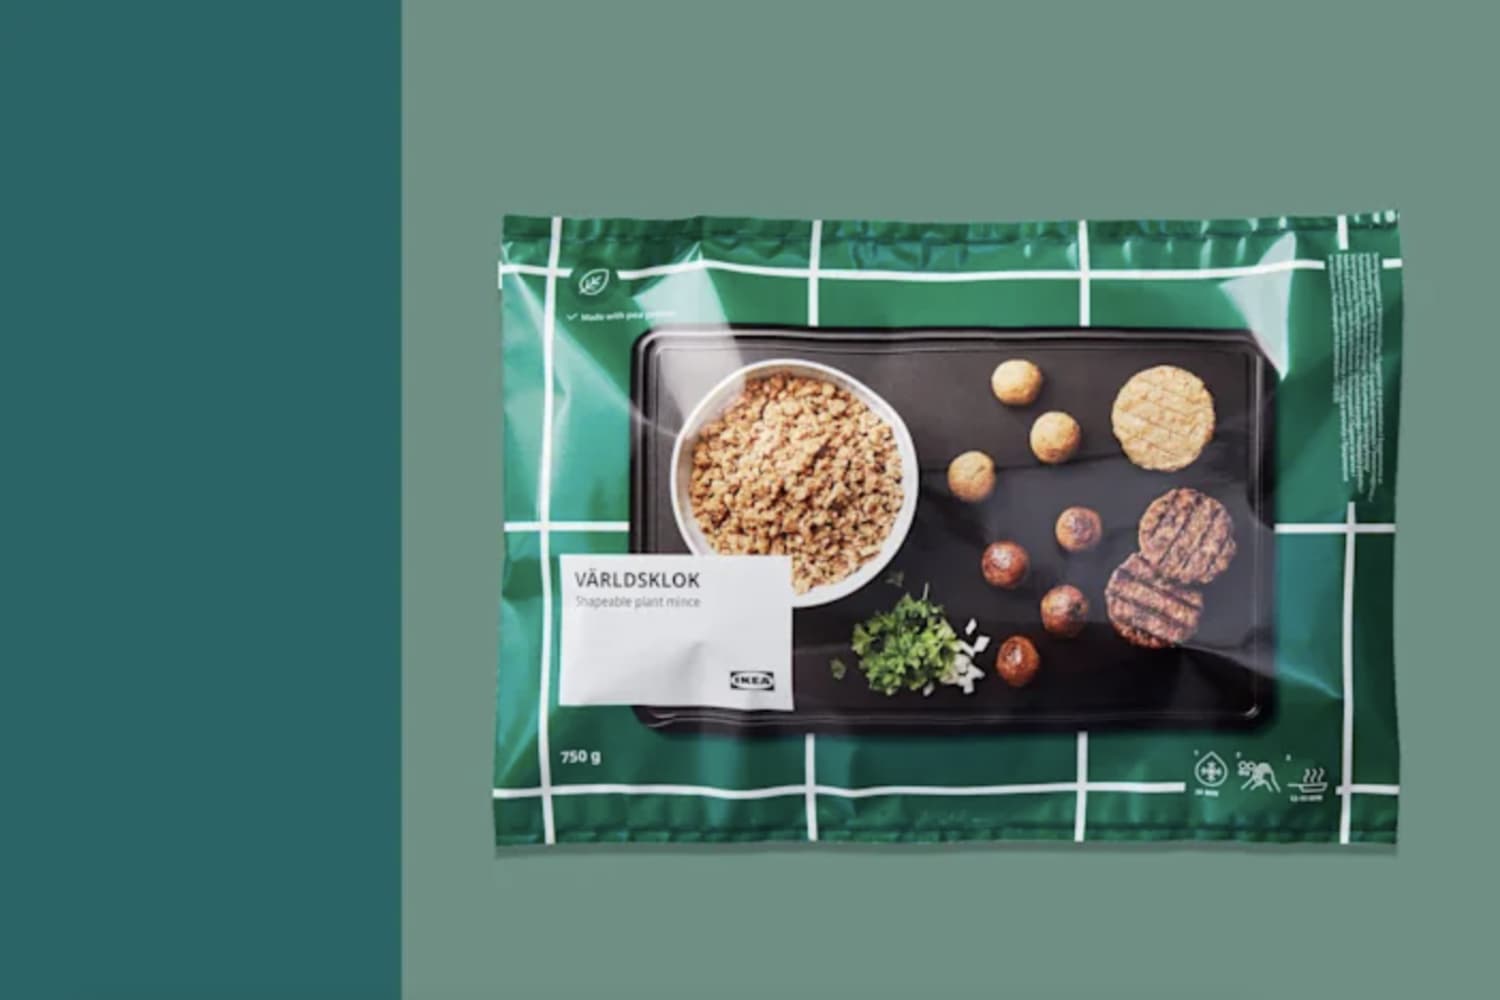 IKEA Is Selling Packs of Its Plant-Based ‘Meat’ Now, So You Can Make Their Meatballs At Home